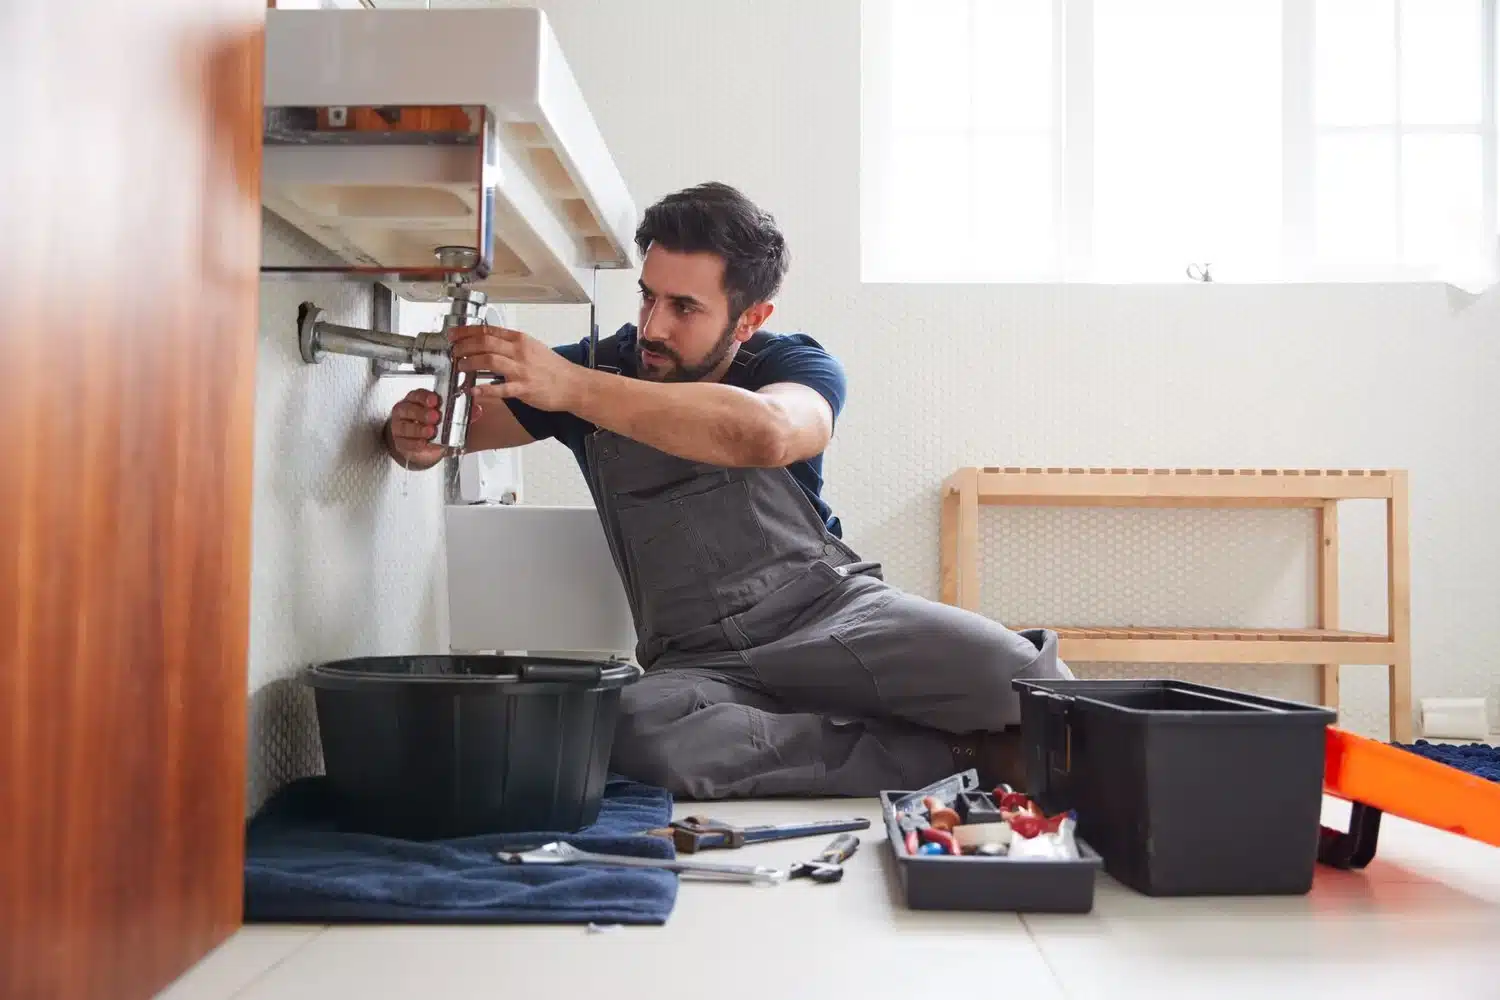 Can You Dodge the High Costs? These Are the Top 6 Home Repairs That Demand Your Wallet’s Attention